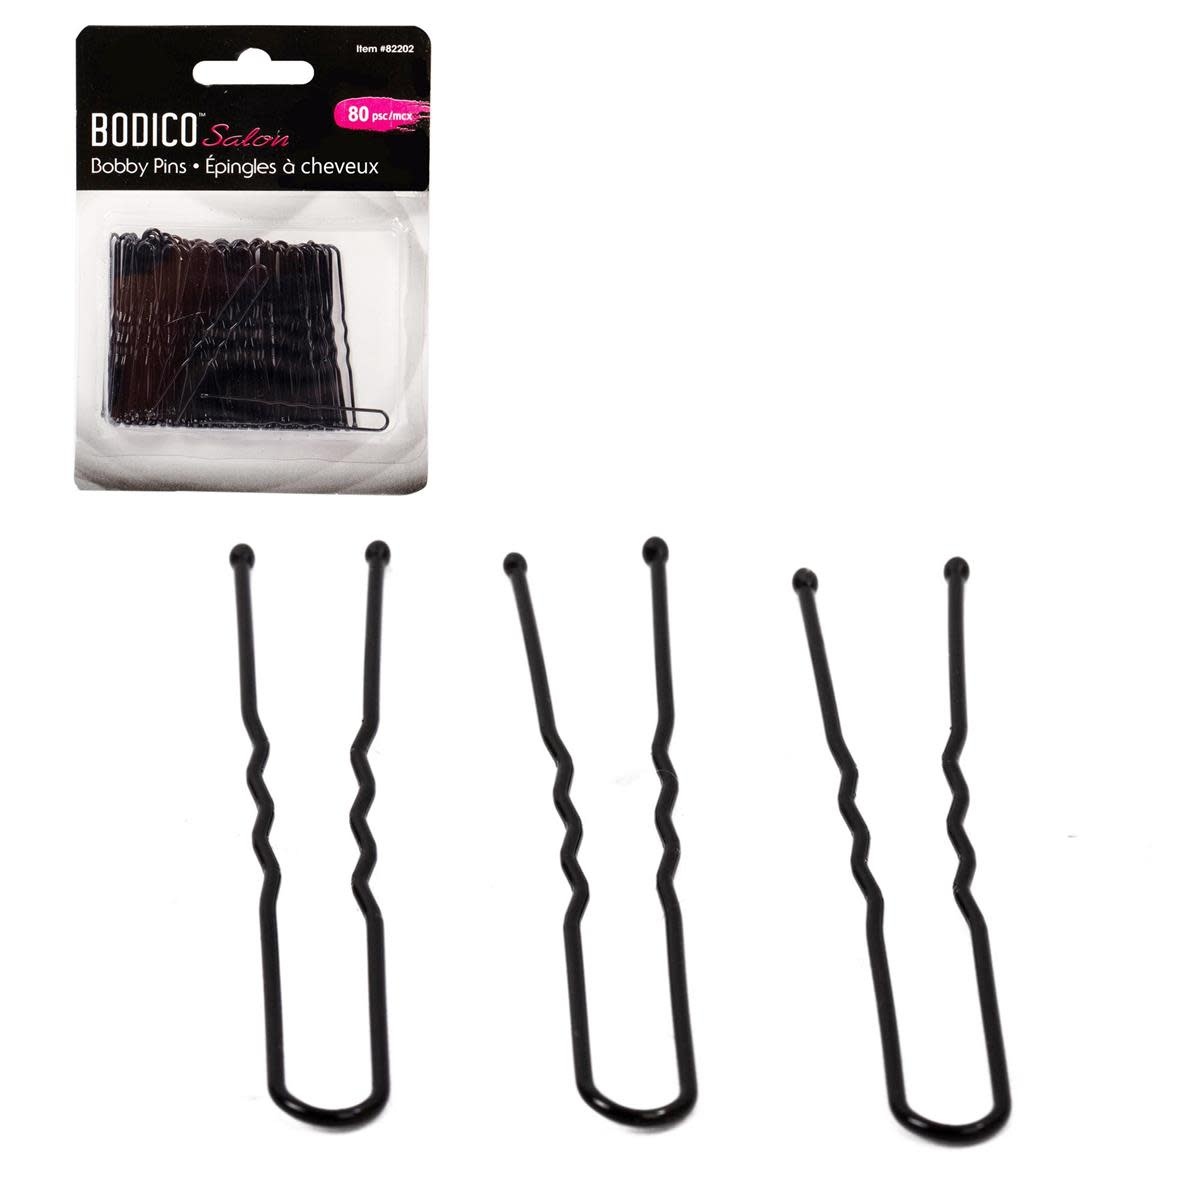 Bobby Pins Bodico 82202, 80 per package